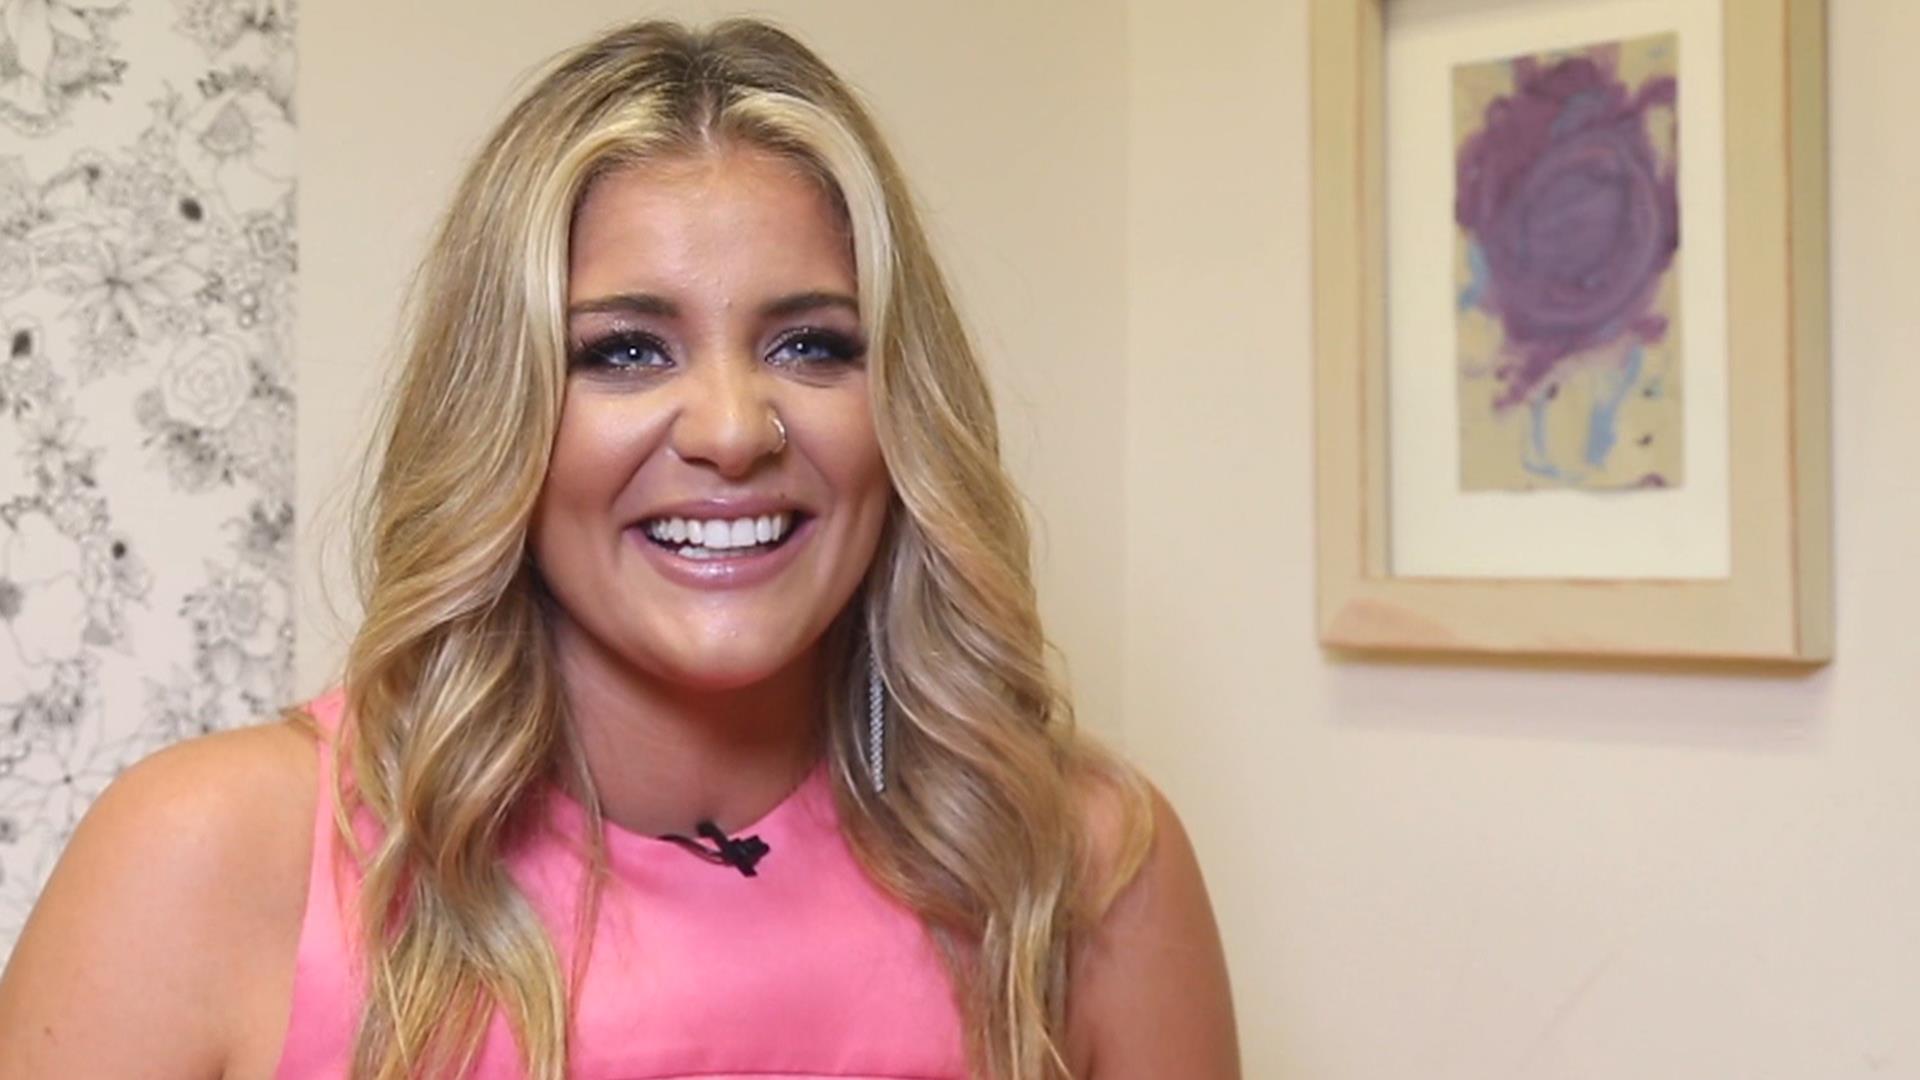 “American Idol” alum and country music star Lauren Alaina shares why she lo...